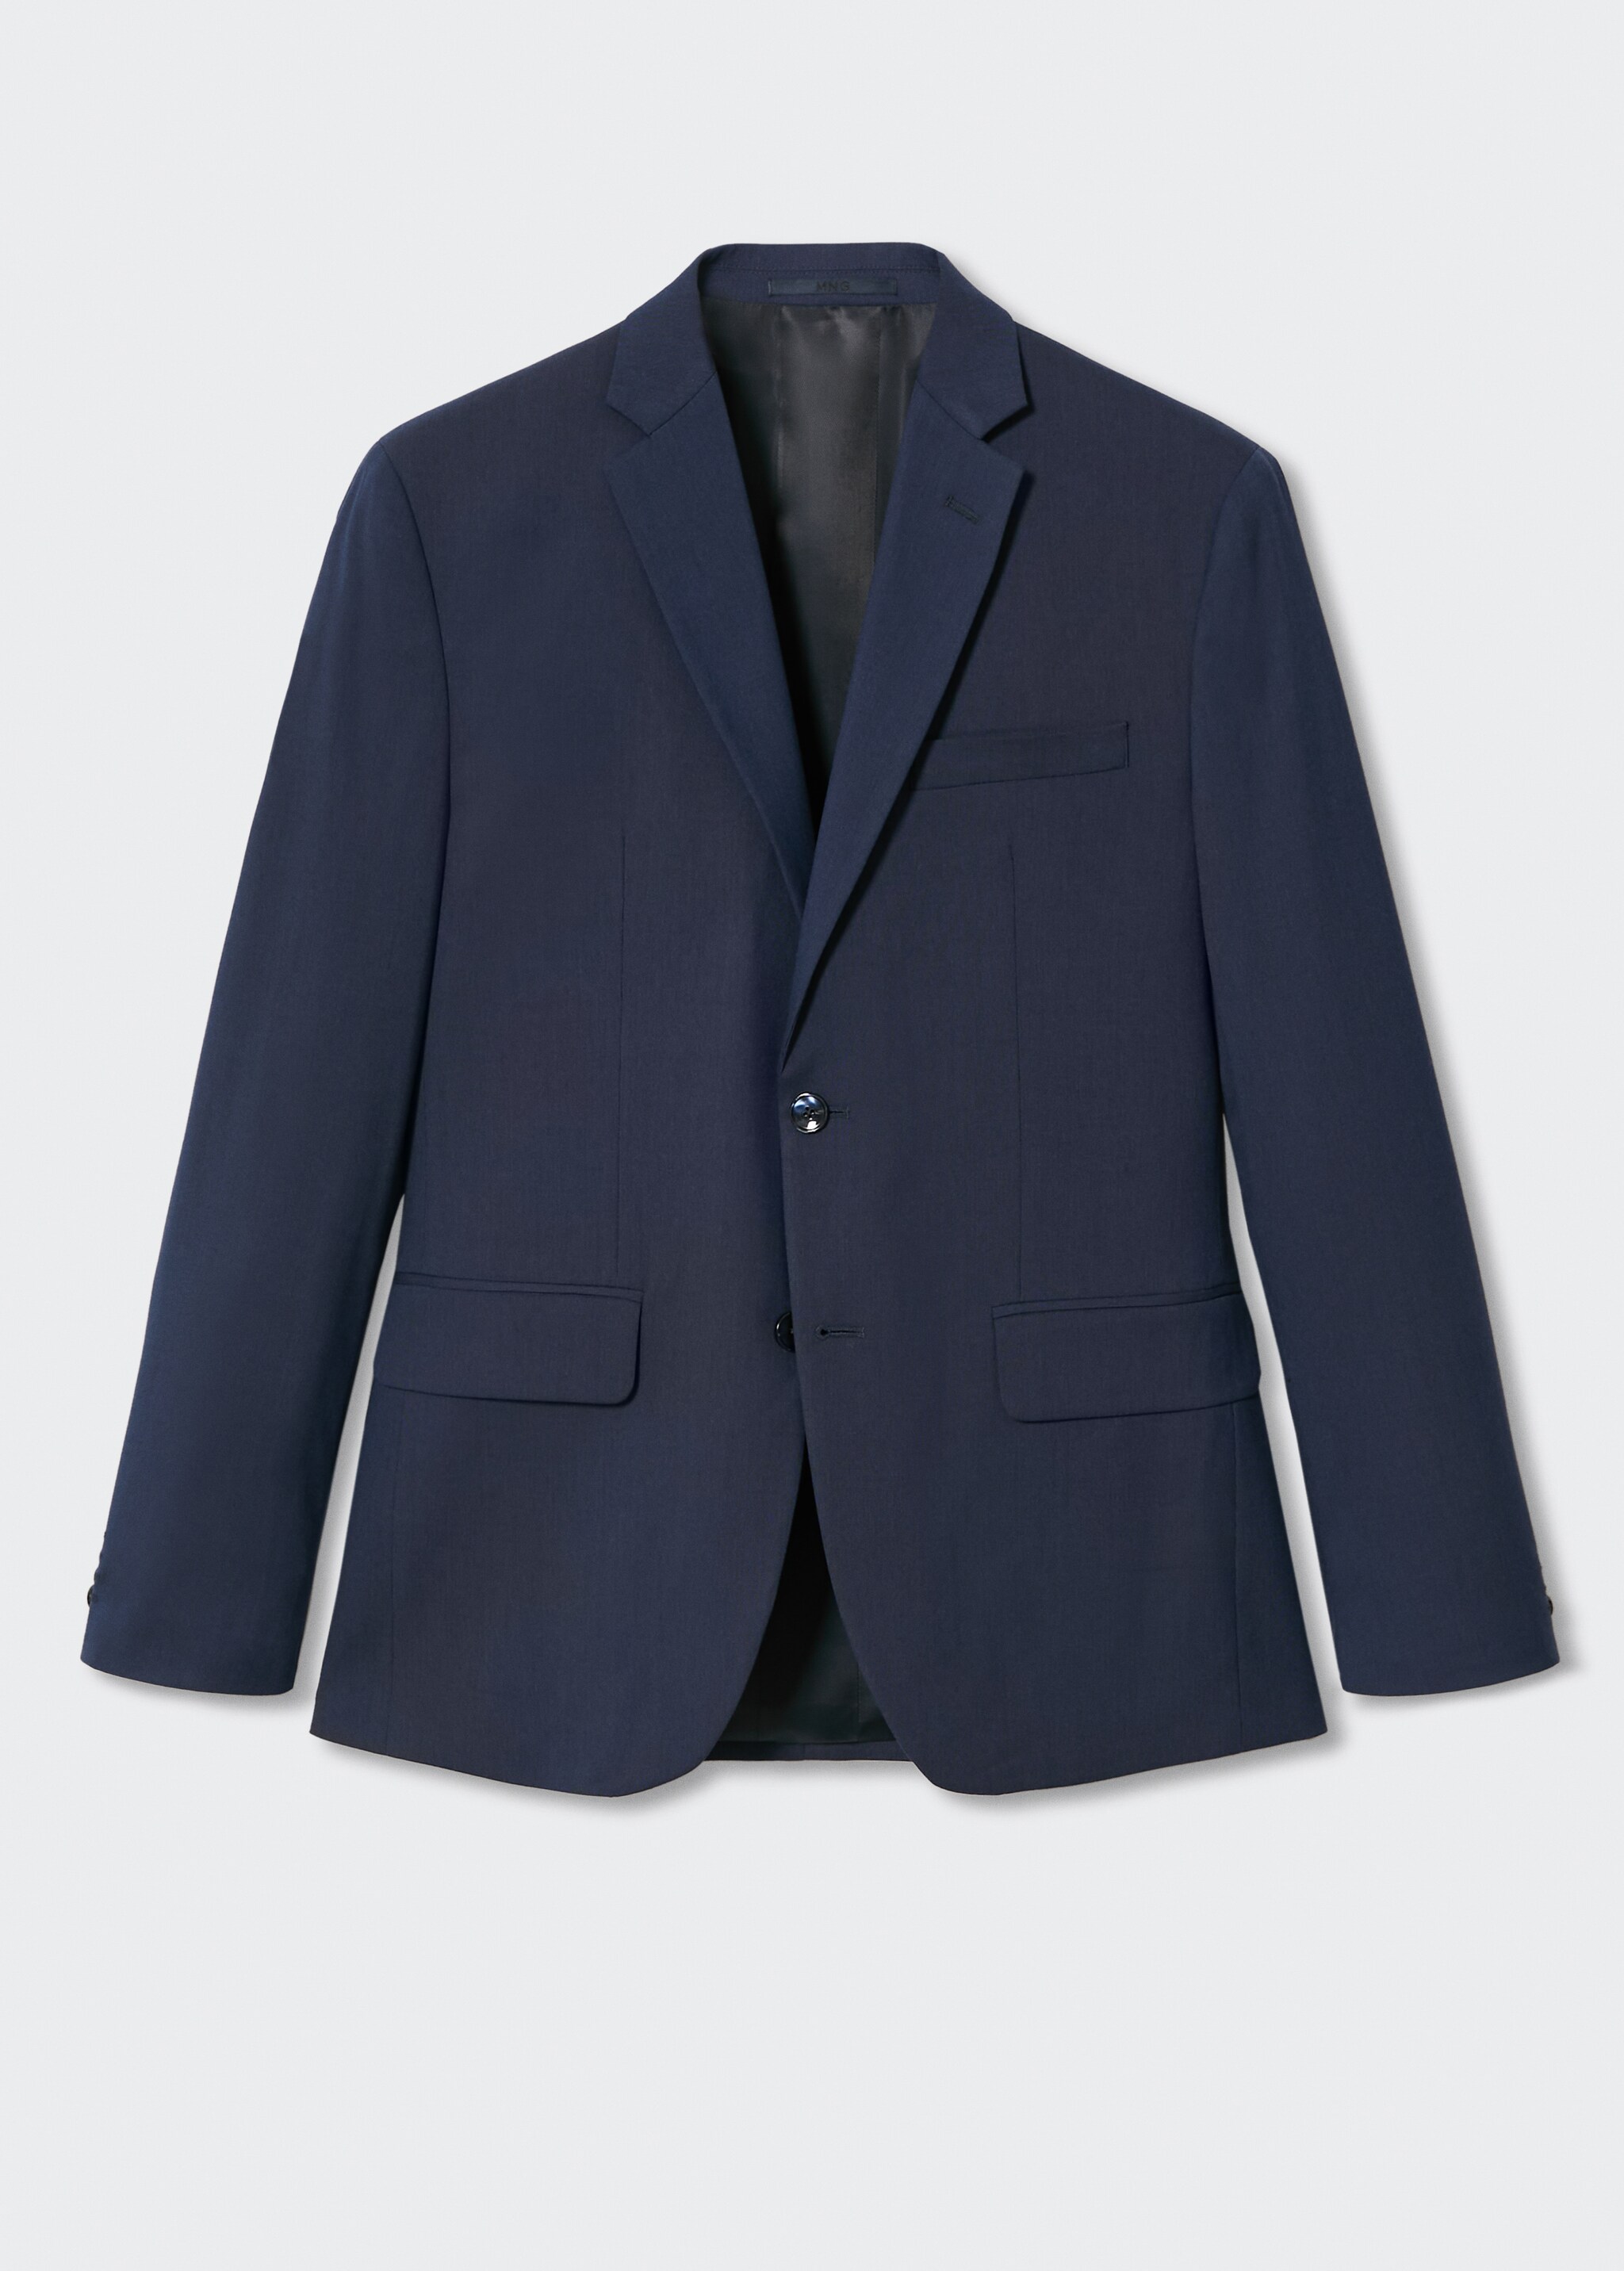 Slim fit microstructure suit blazer - Article without model